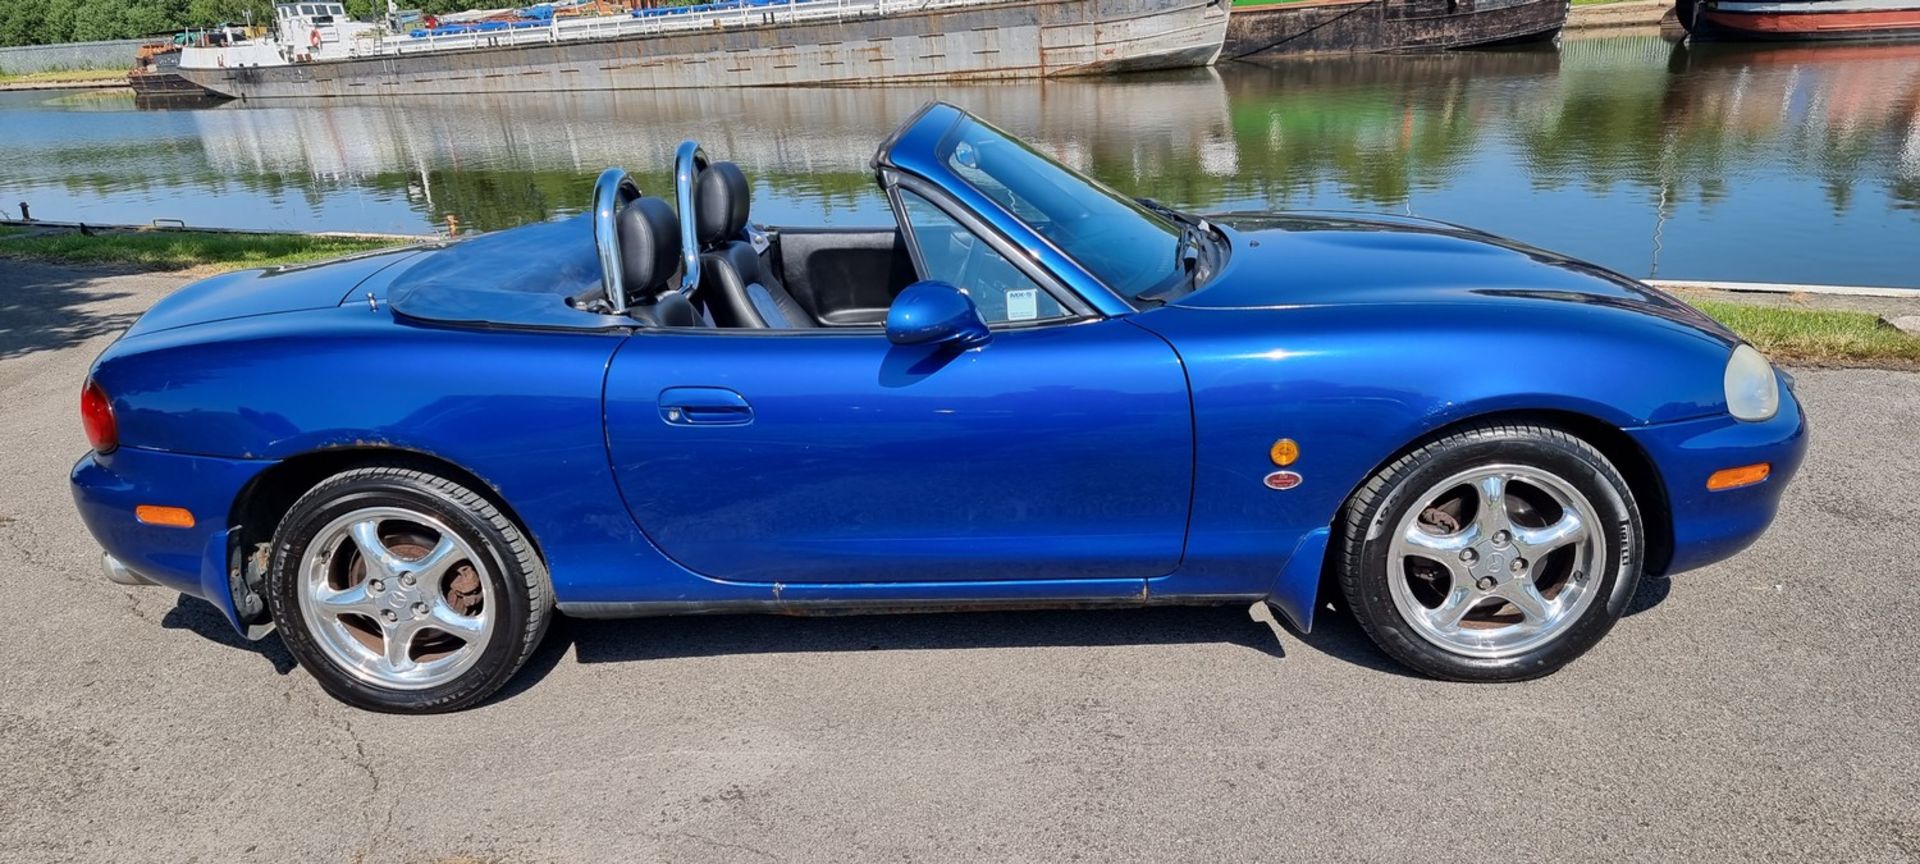 1999 Mazda MX5 10th Anniversary, 1800cc. Registration number T10AEX. Chassis number - Image 7 of 16